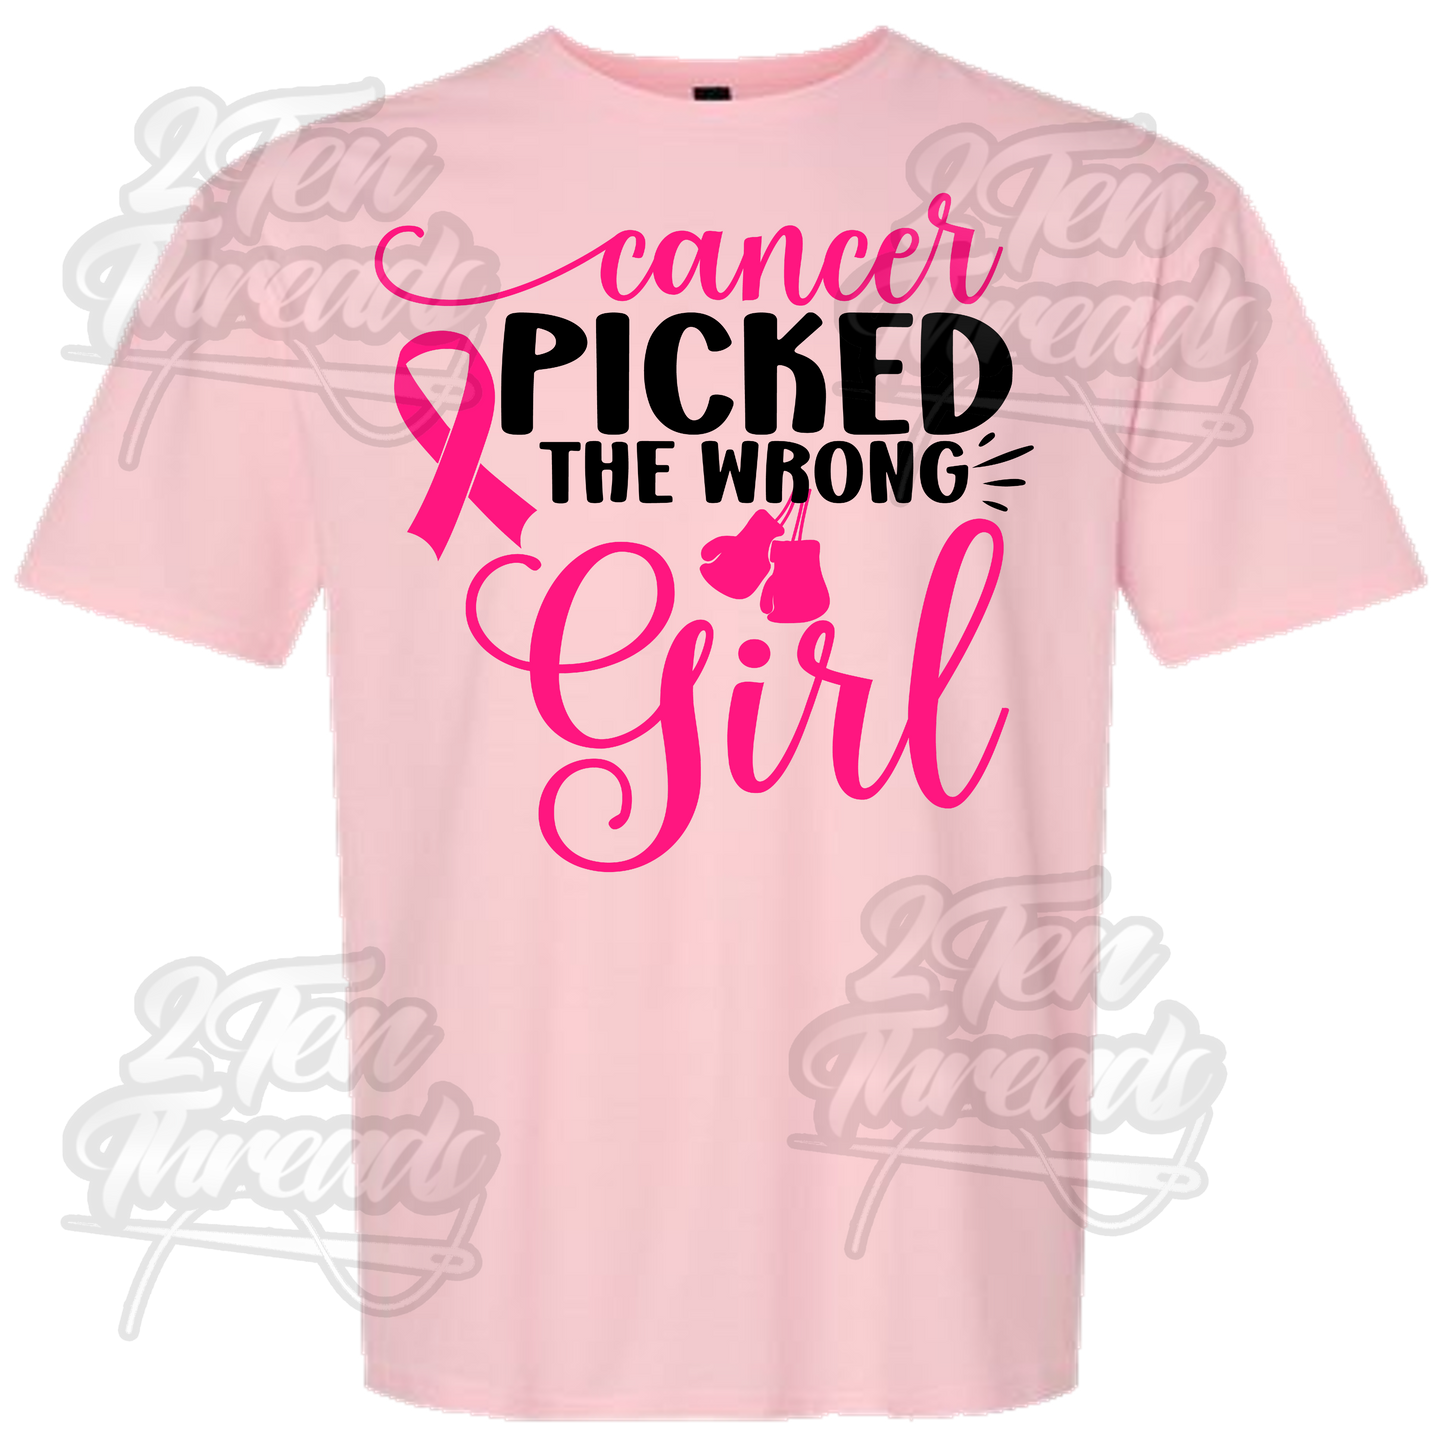 Picked the wrong person Shirt